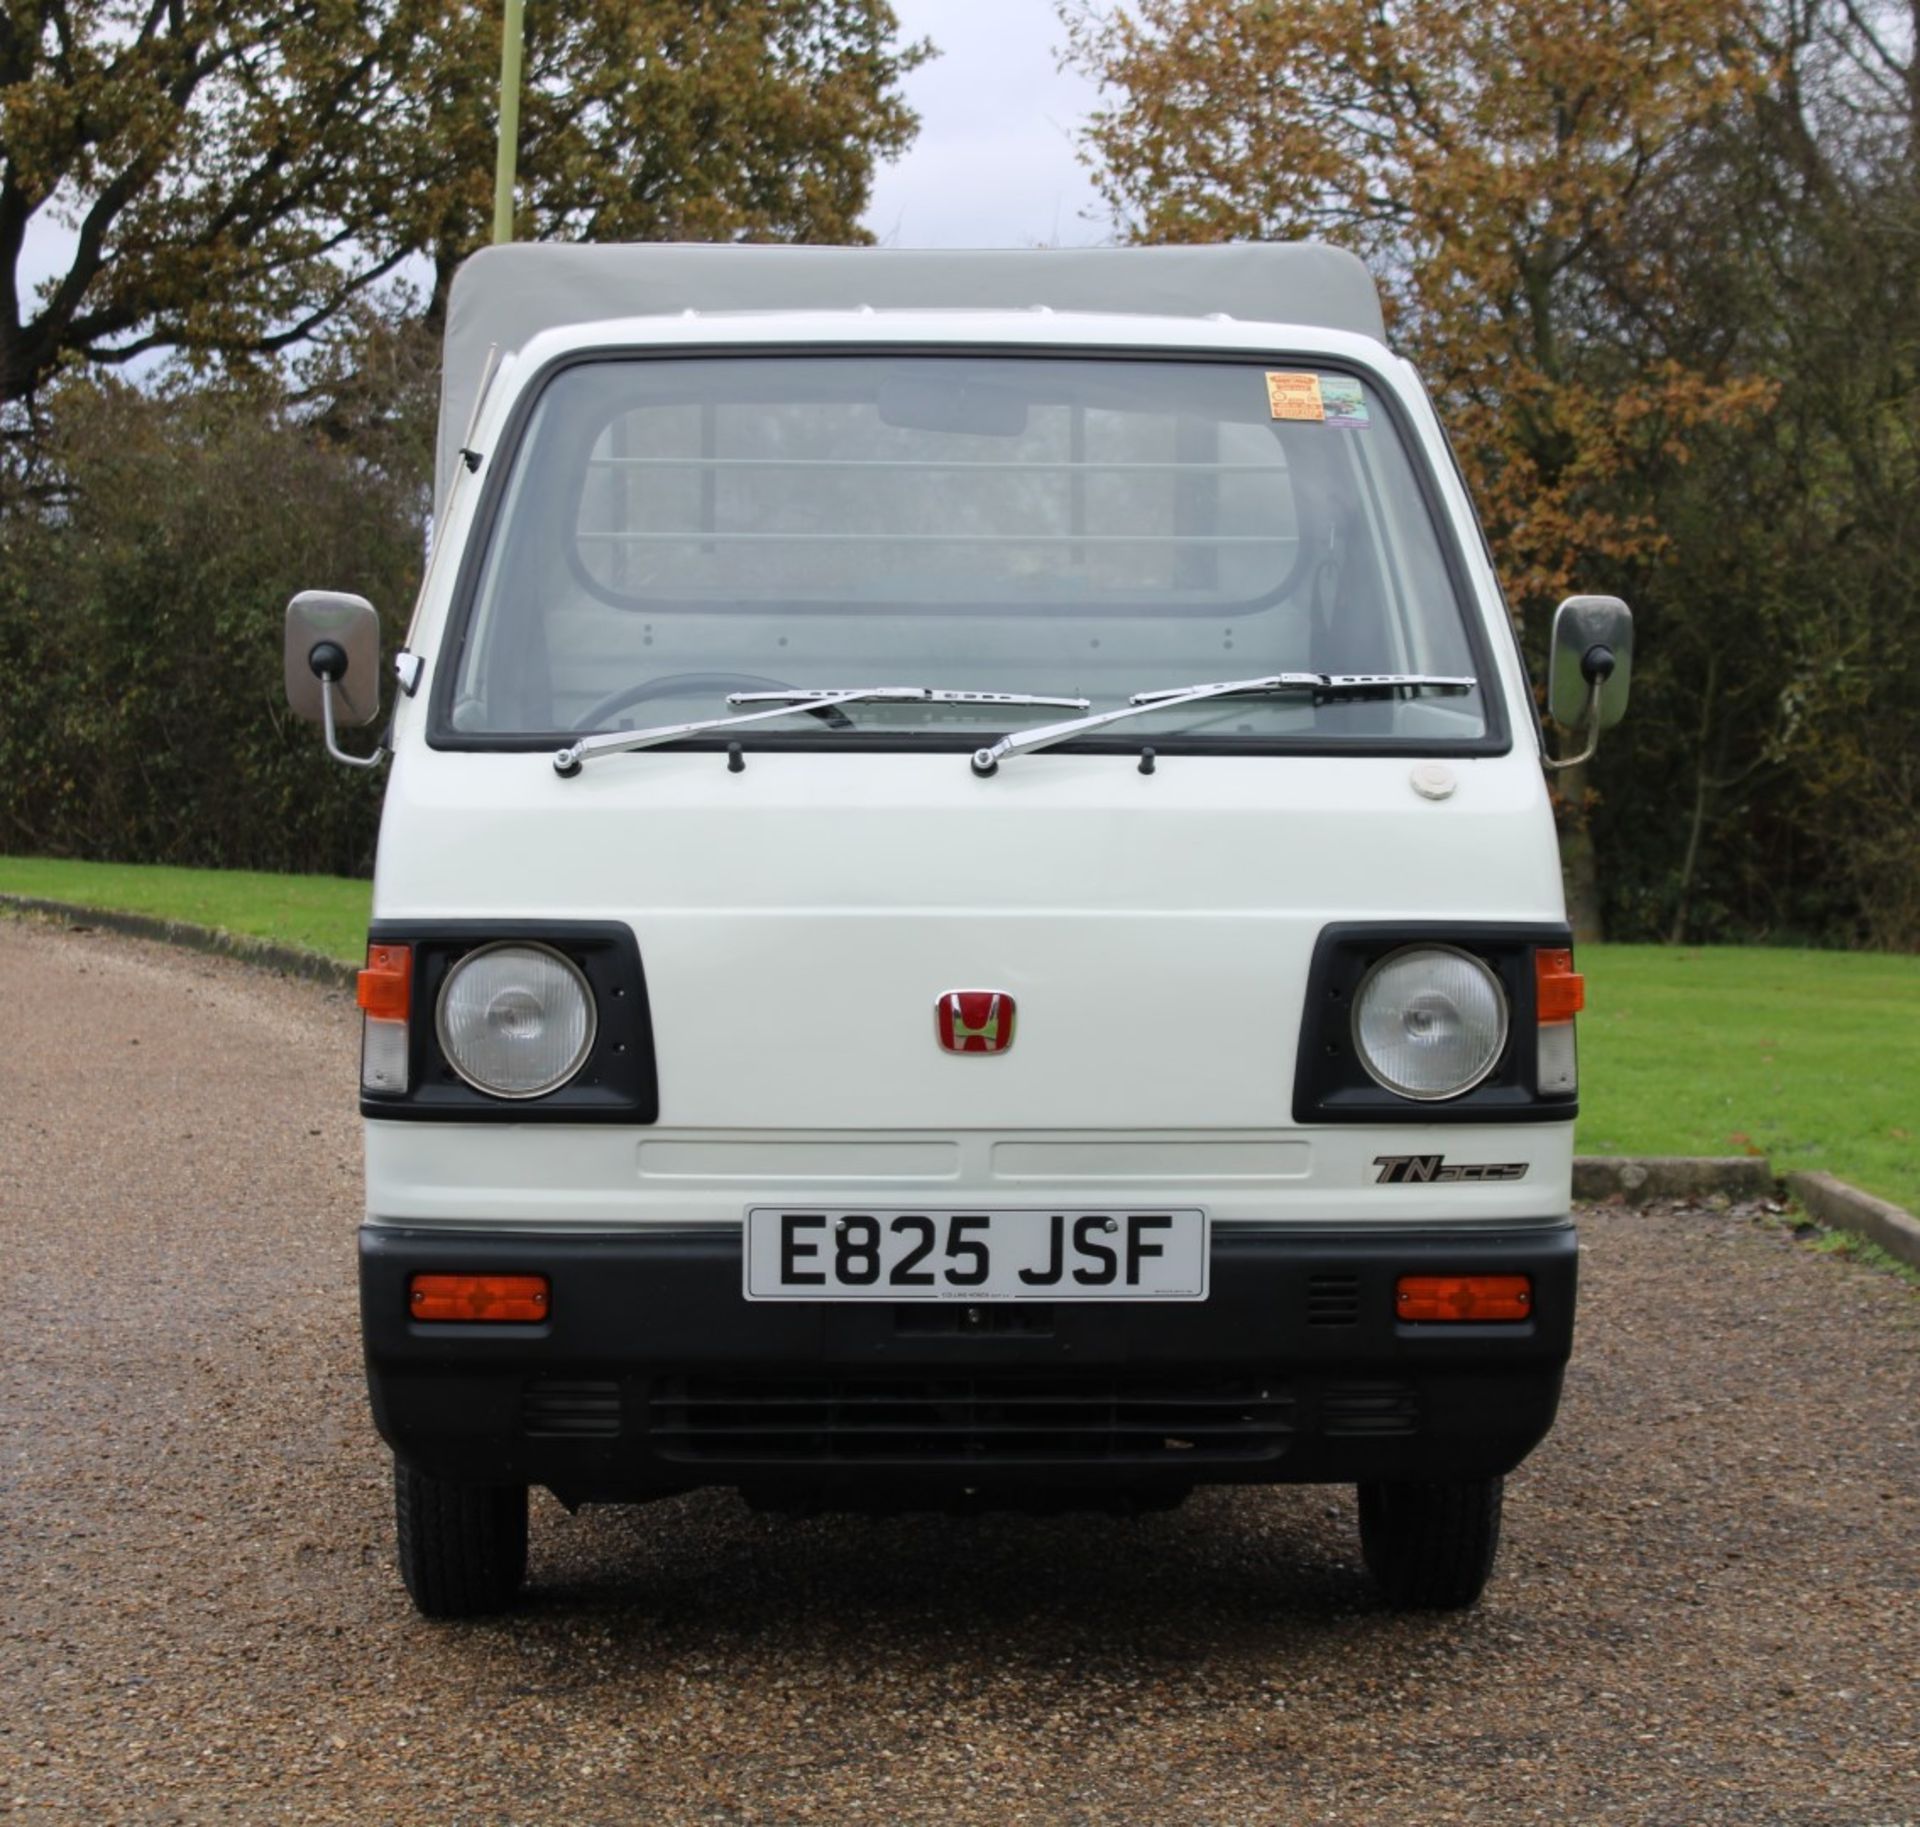 1987 Honda Acty Pick-up - Image 4 of 27